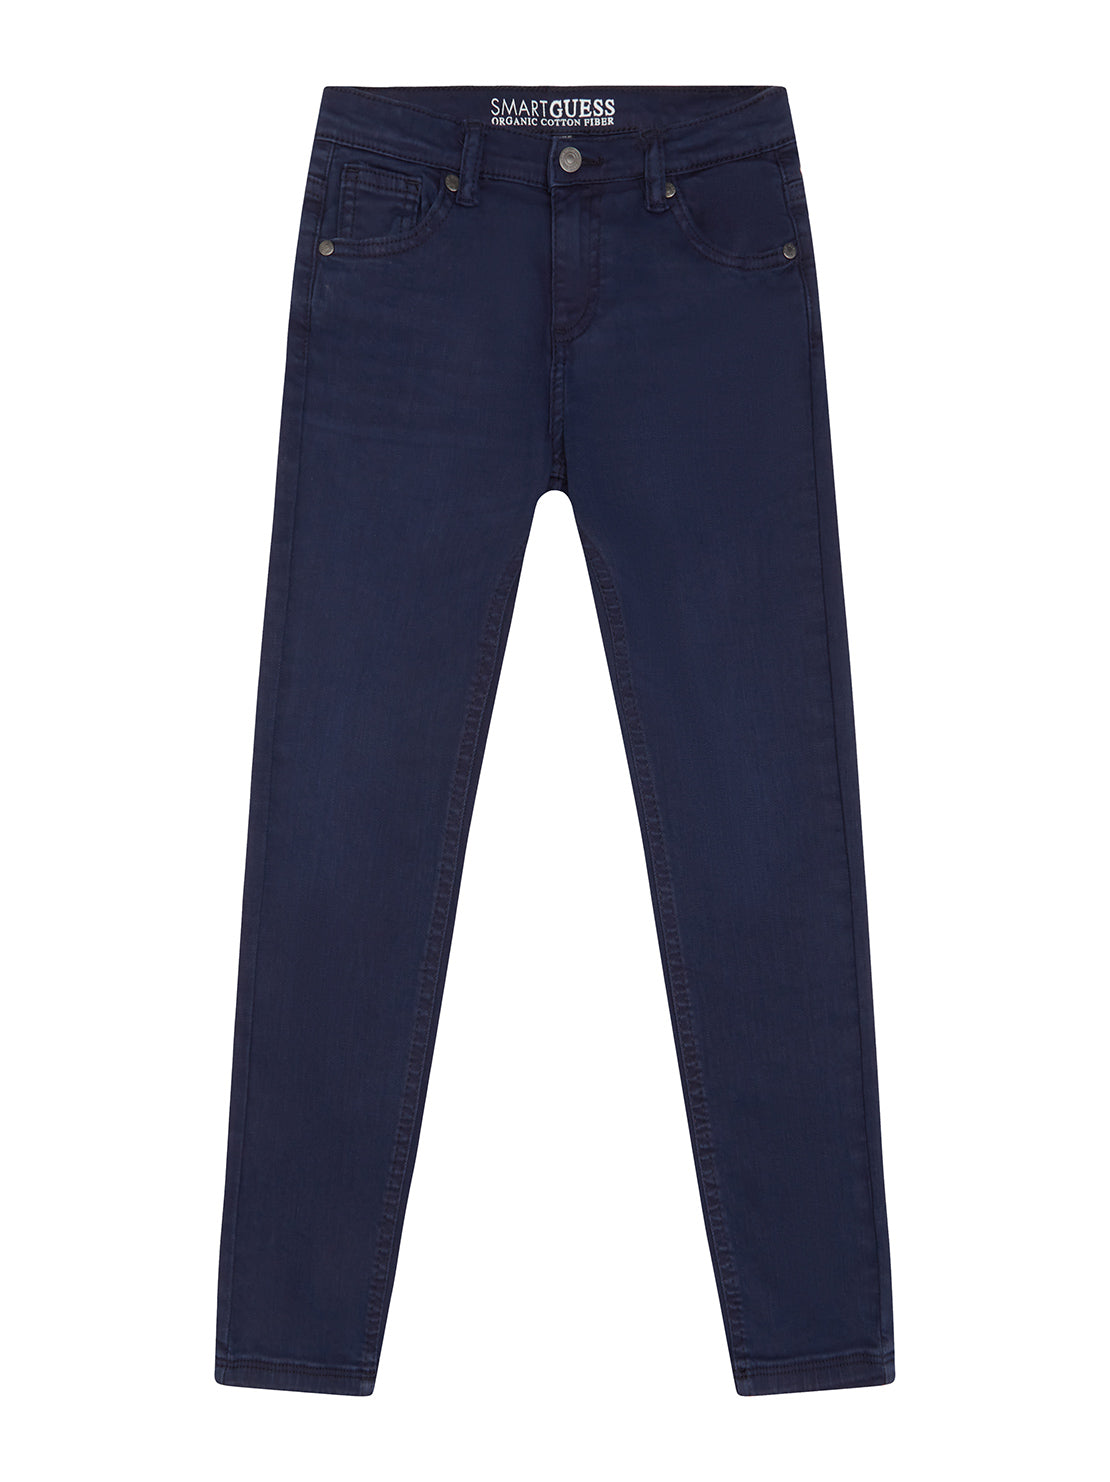 GUESS Little Boys St Bull Skinny Denim Jeans In Deck Blue (2-7) N0YB02WE620 Front View